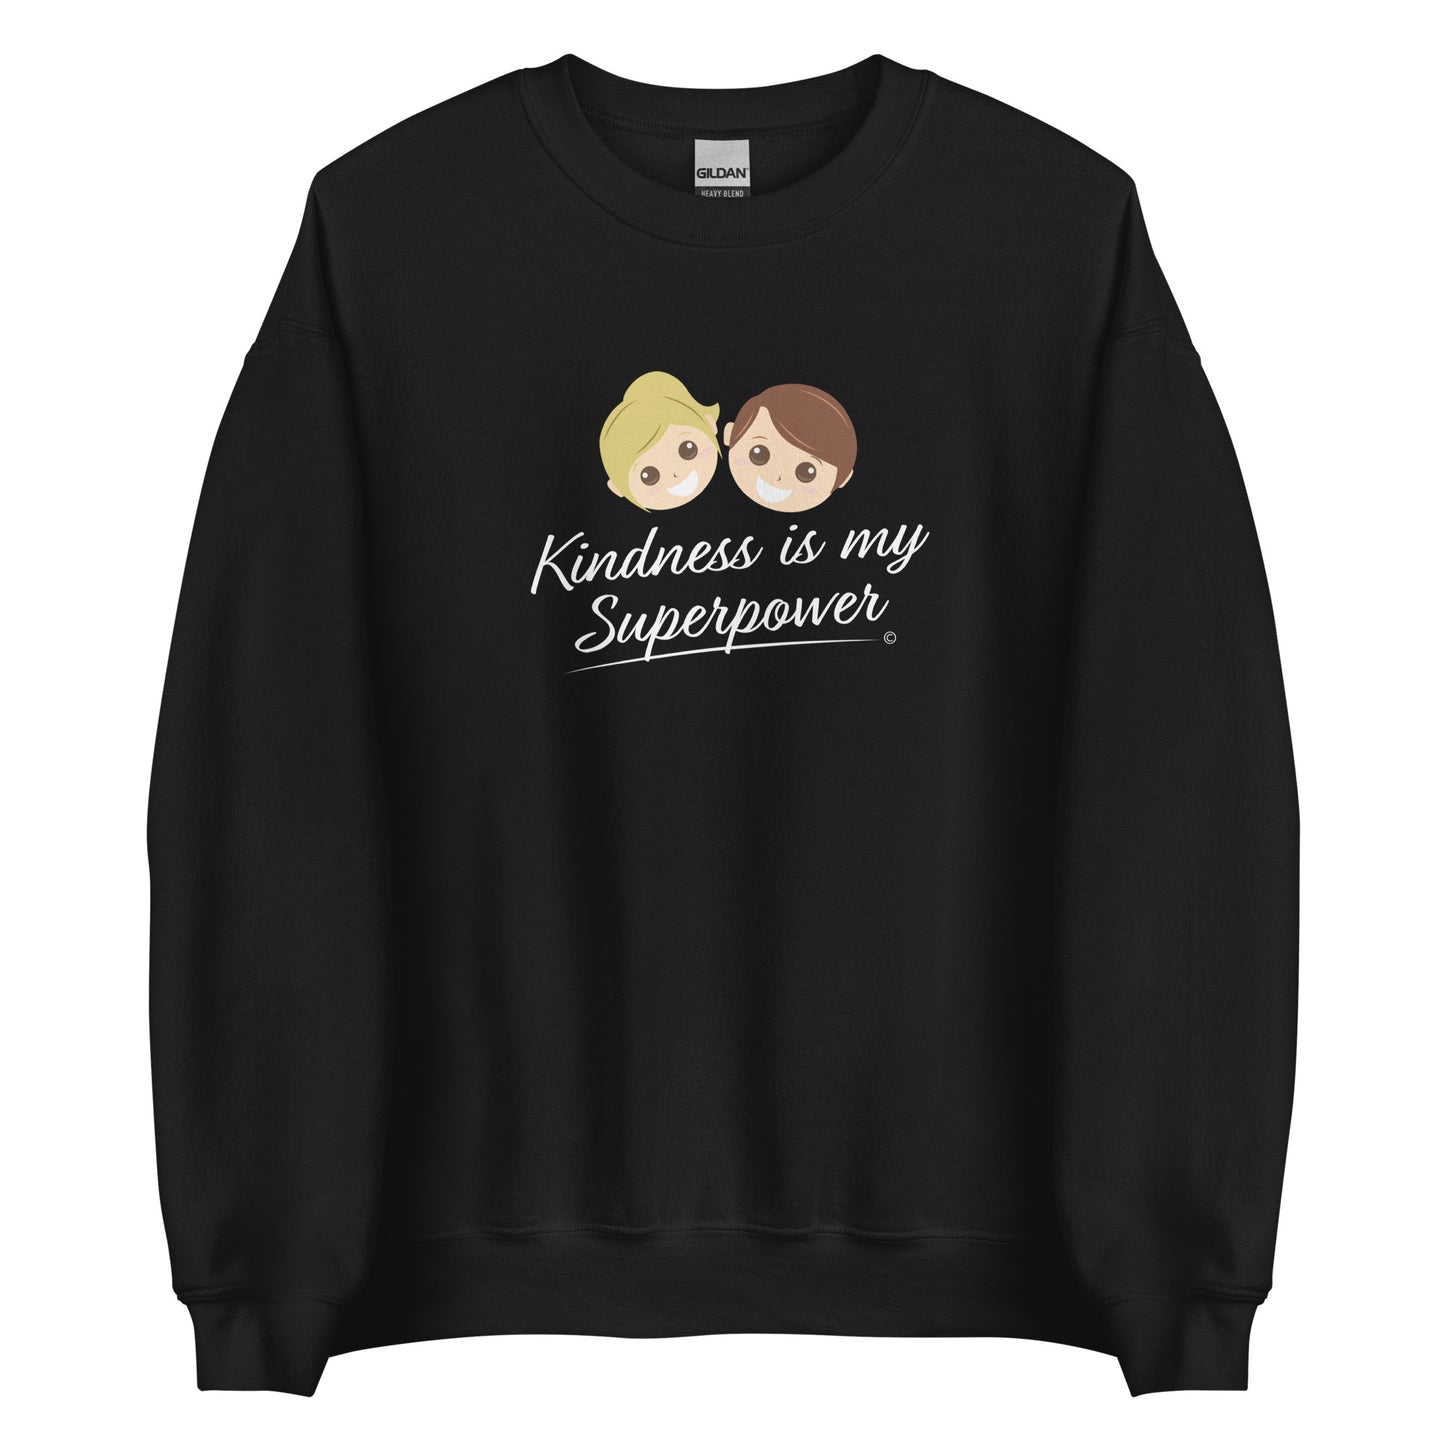 A cozy unisex sweatshirt in black featuring the uplifting quote 'Kindness is my Superpower' in bold lettering.